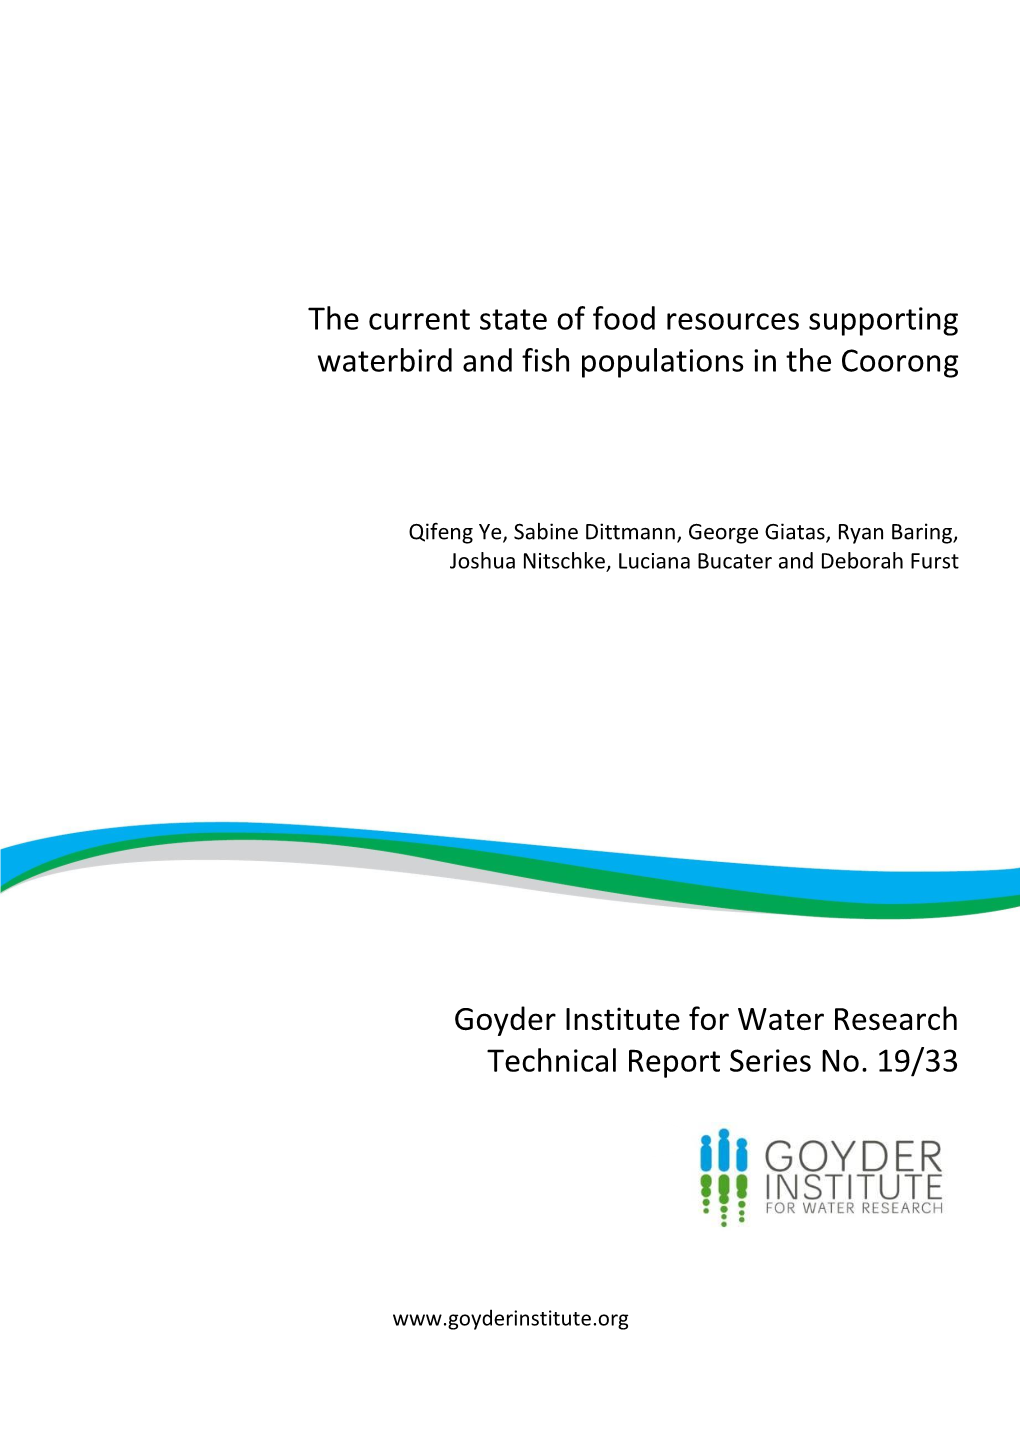 The Current State of Food Resources Supporting Waterbird and Fish Populations in the Coorong